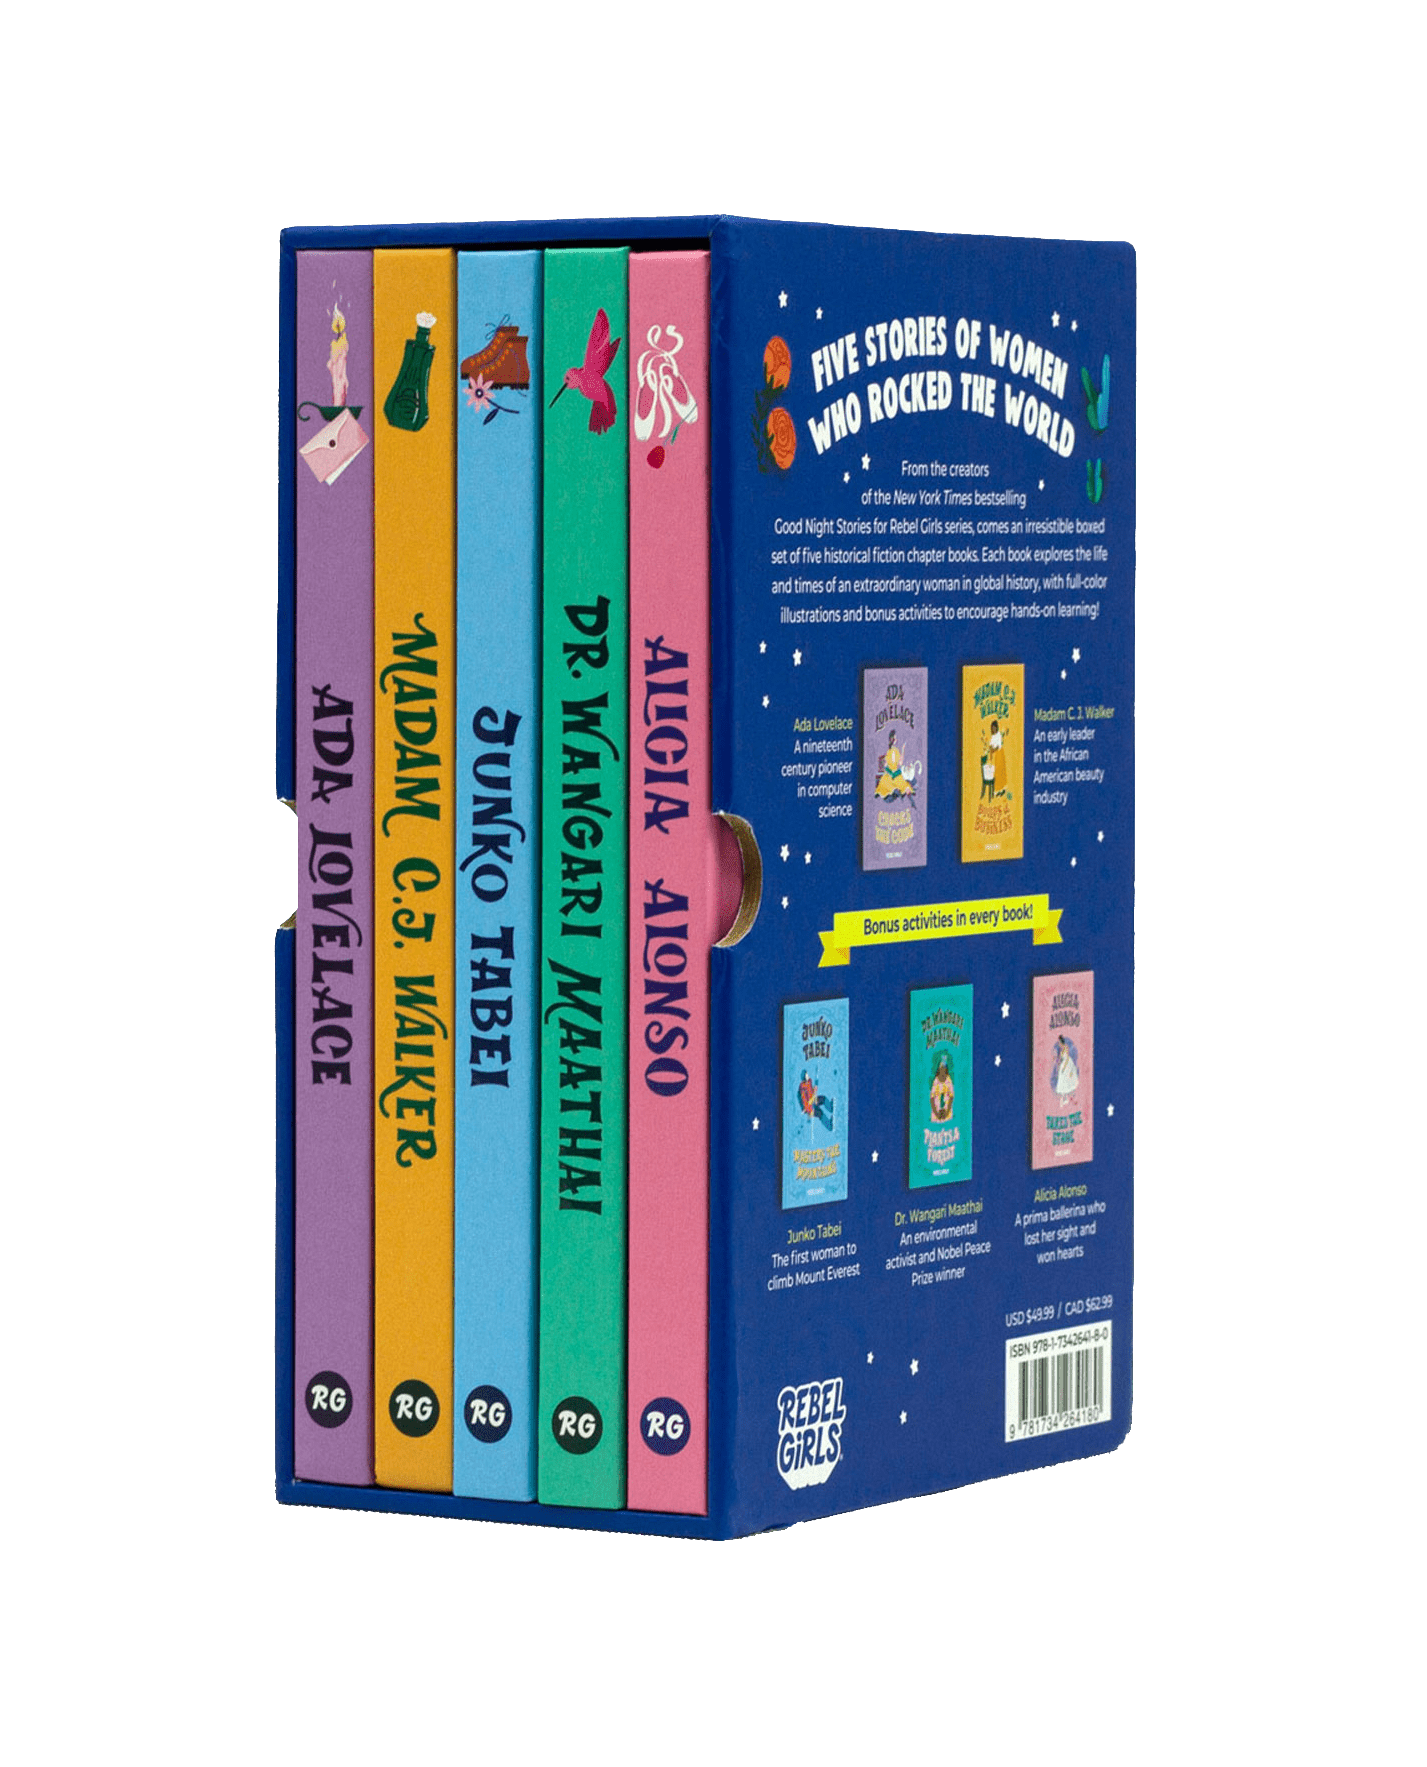 Good Night Stories for Rebel Girls: The Chapter Book Collection